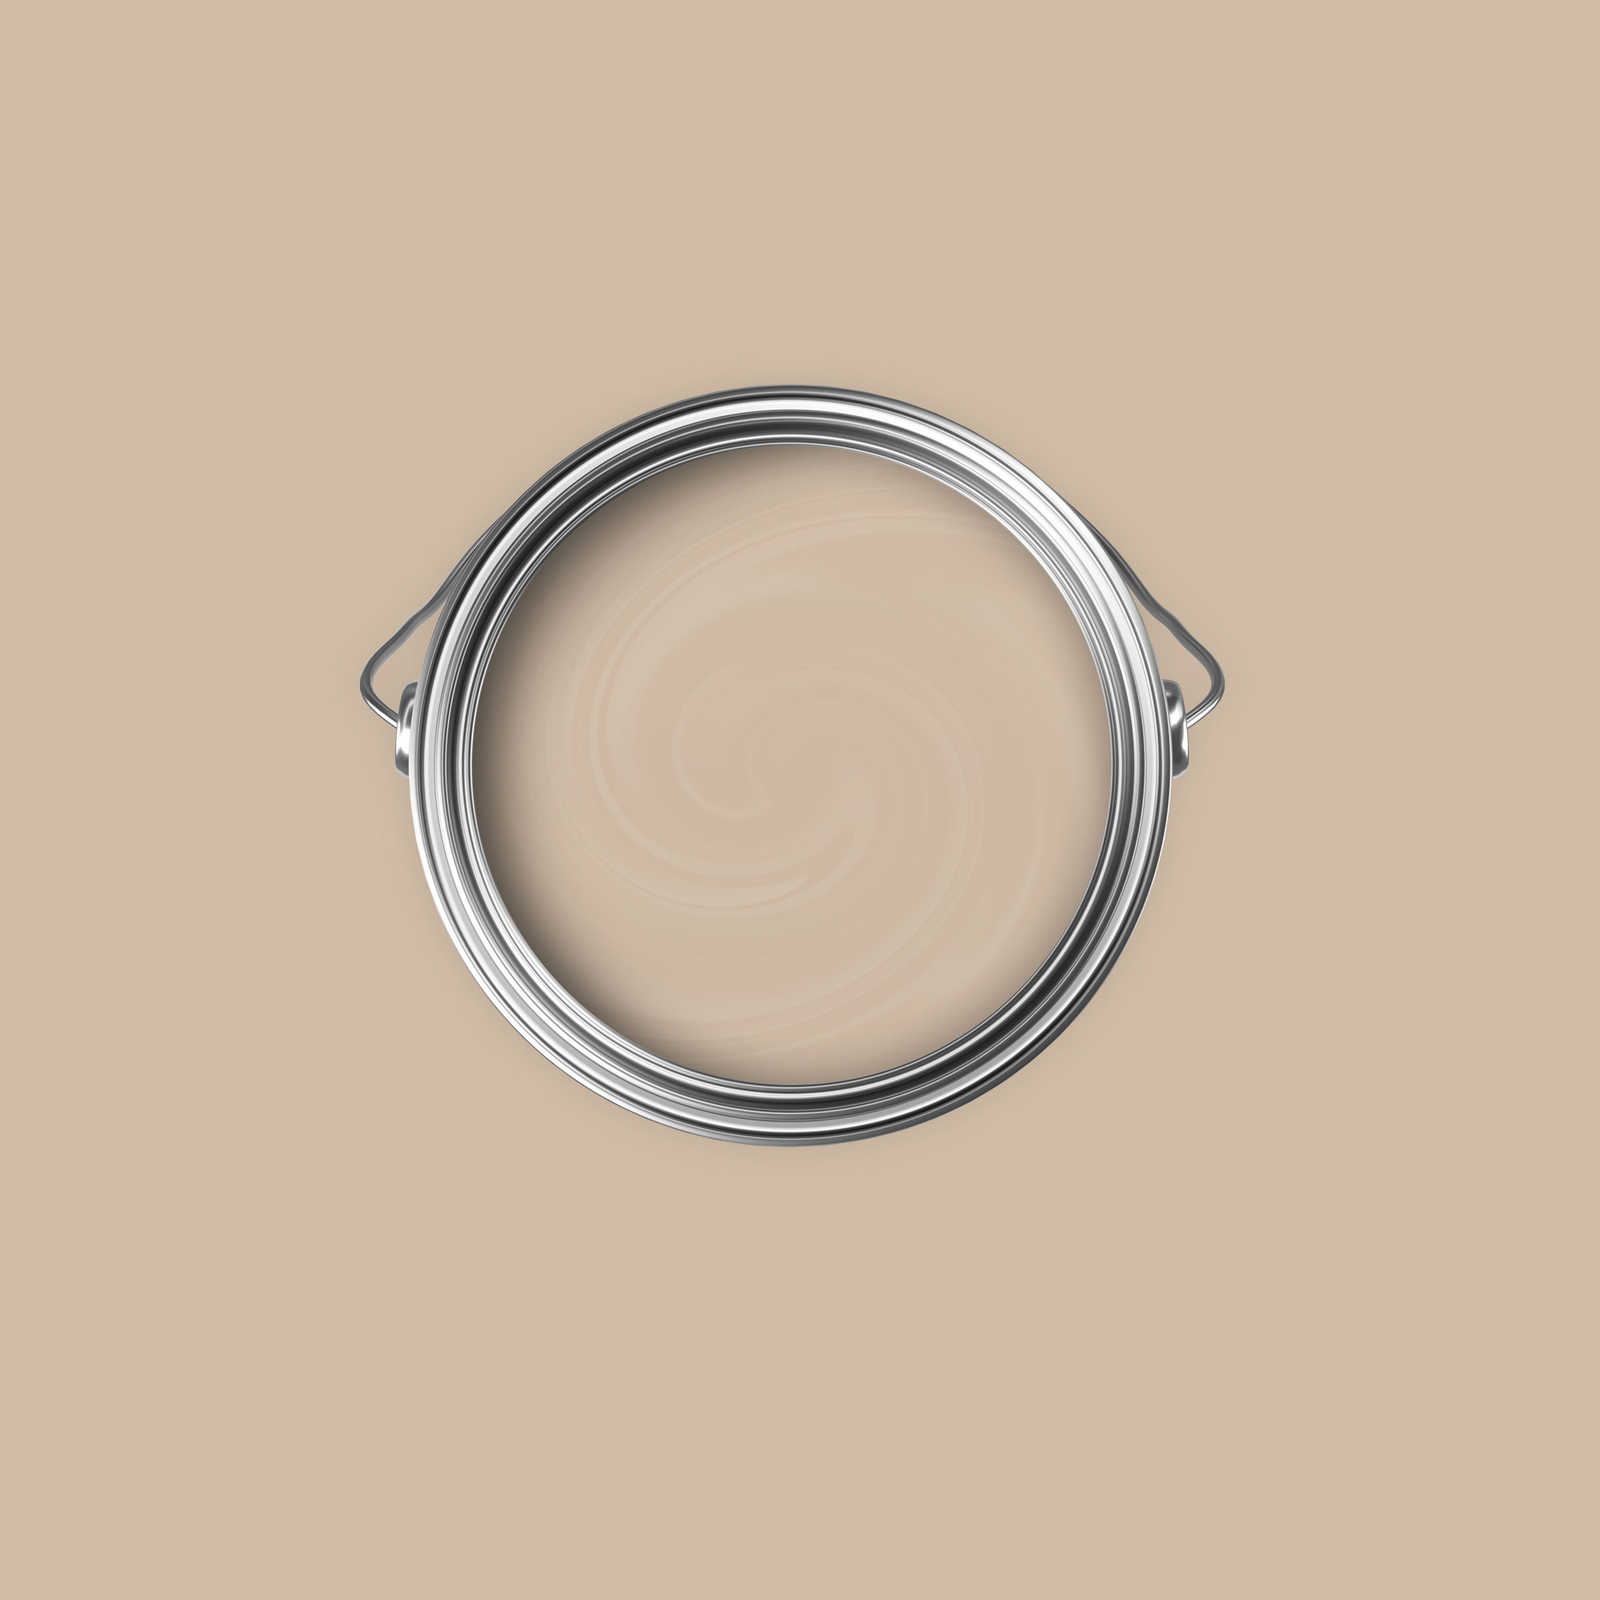             Premium Wall Paint homely light beige »Modern Mud« NW716 – 2,5 litre
        